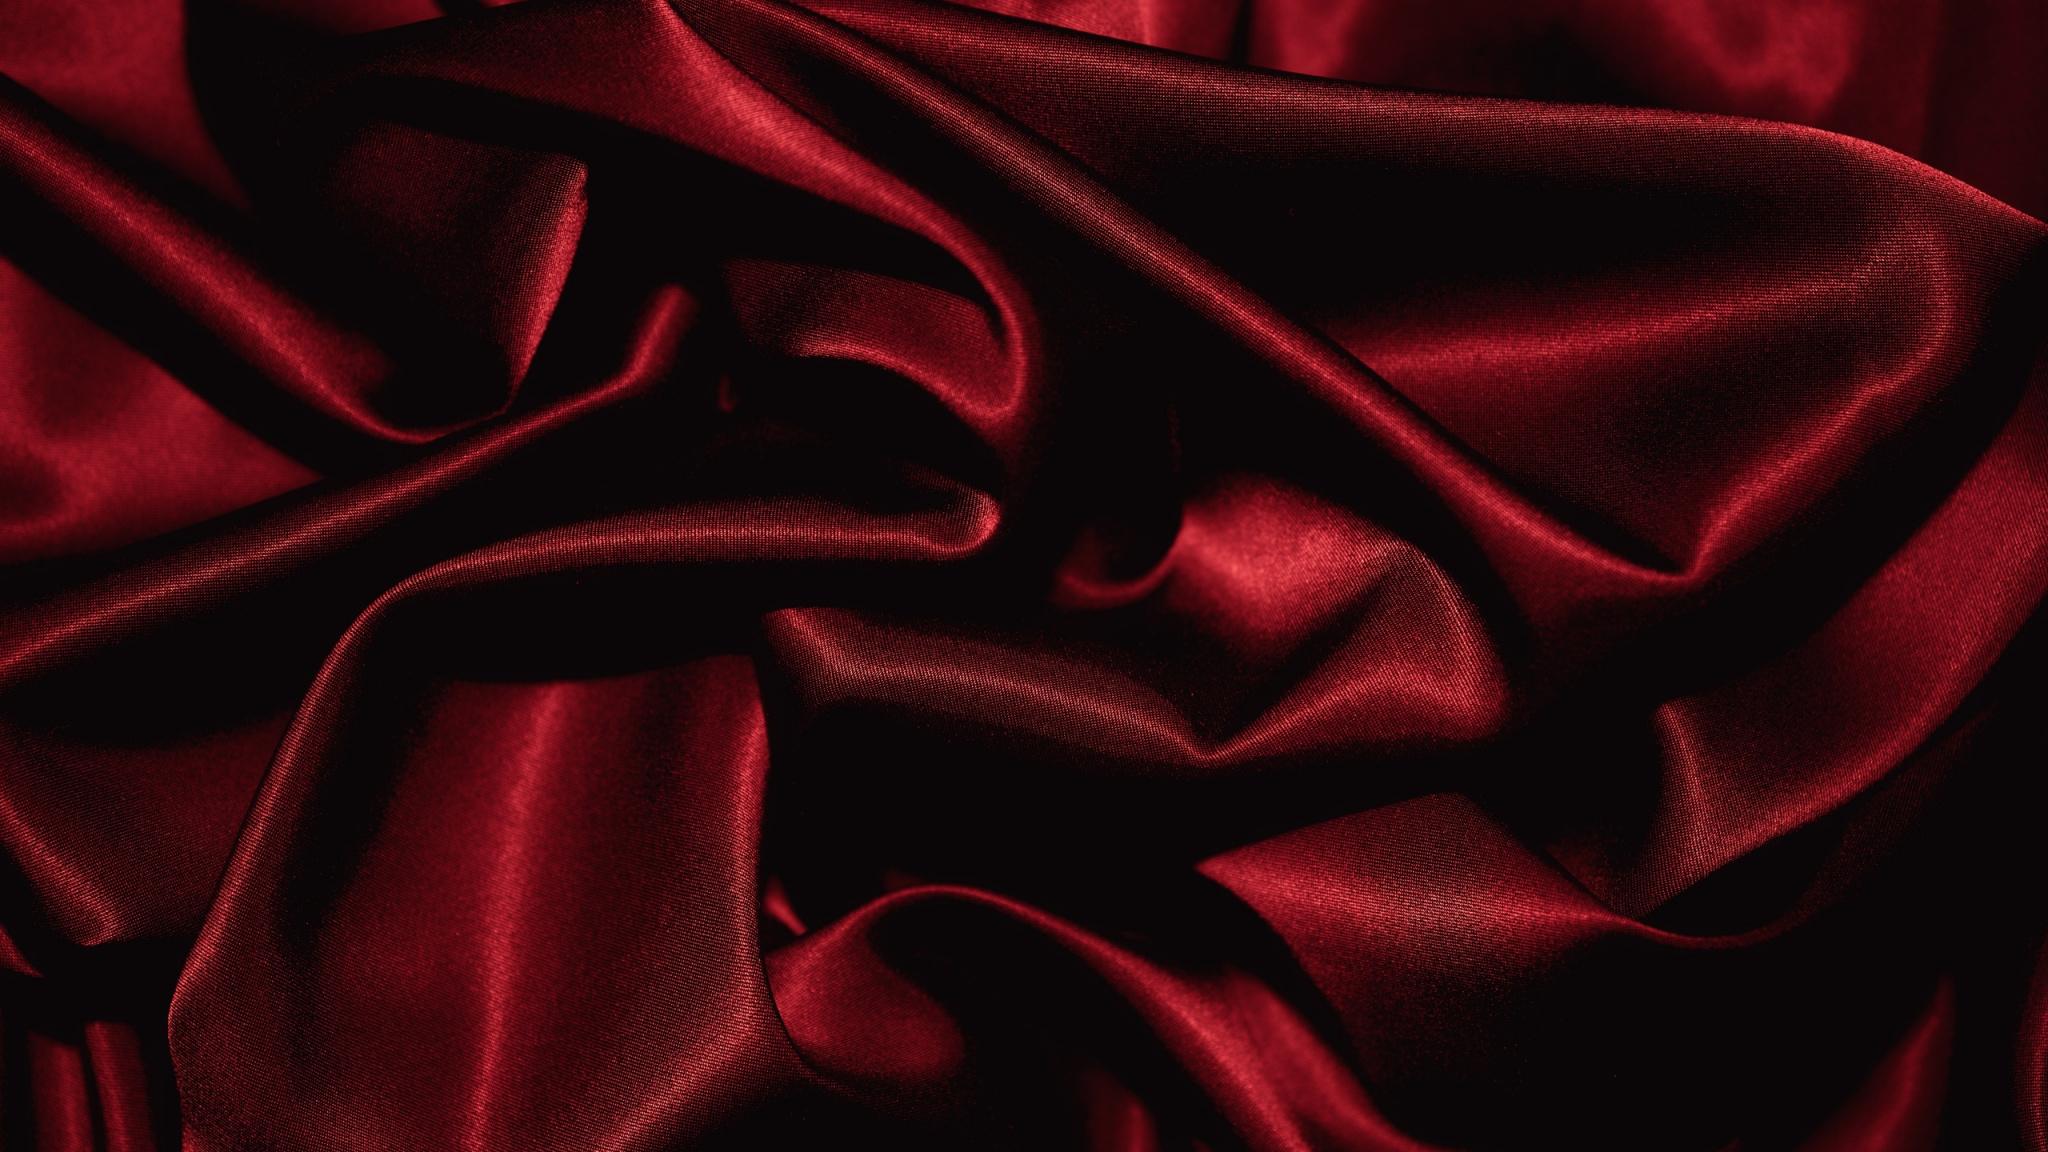 Petal, Satin, Atlas, Red, Close up Image for Youtube Cover